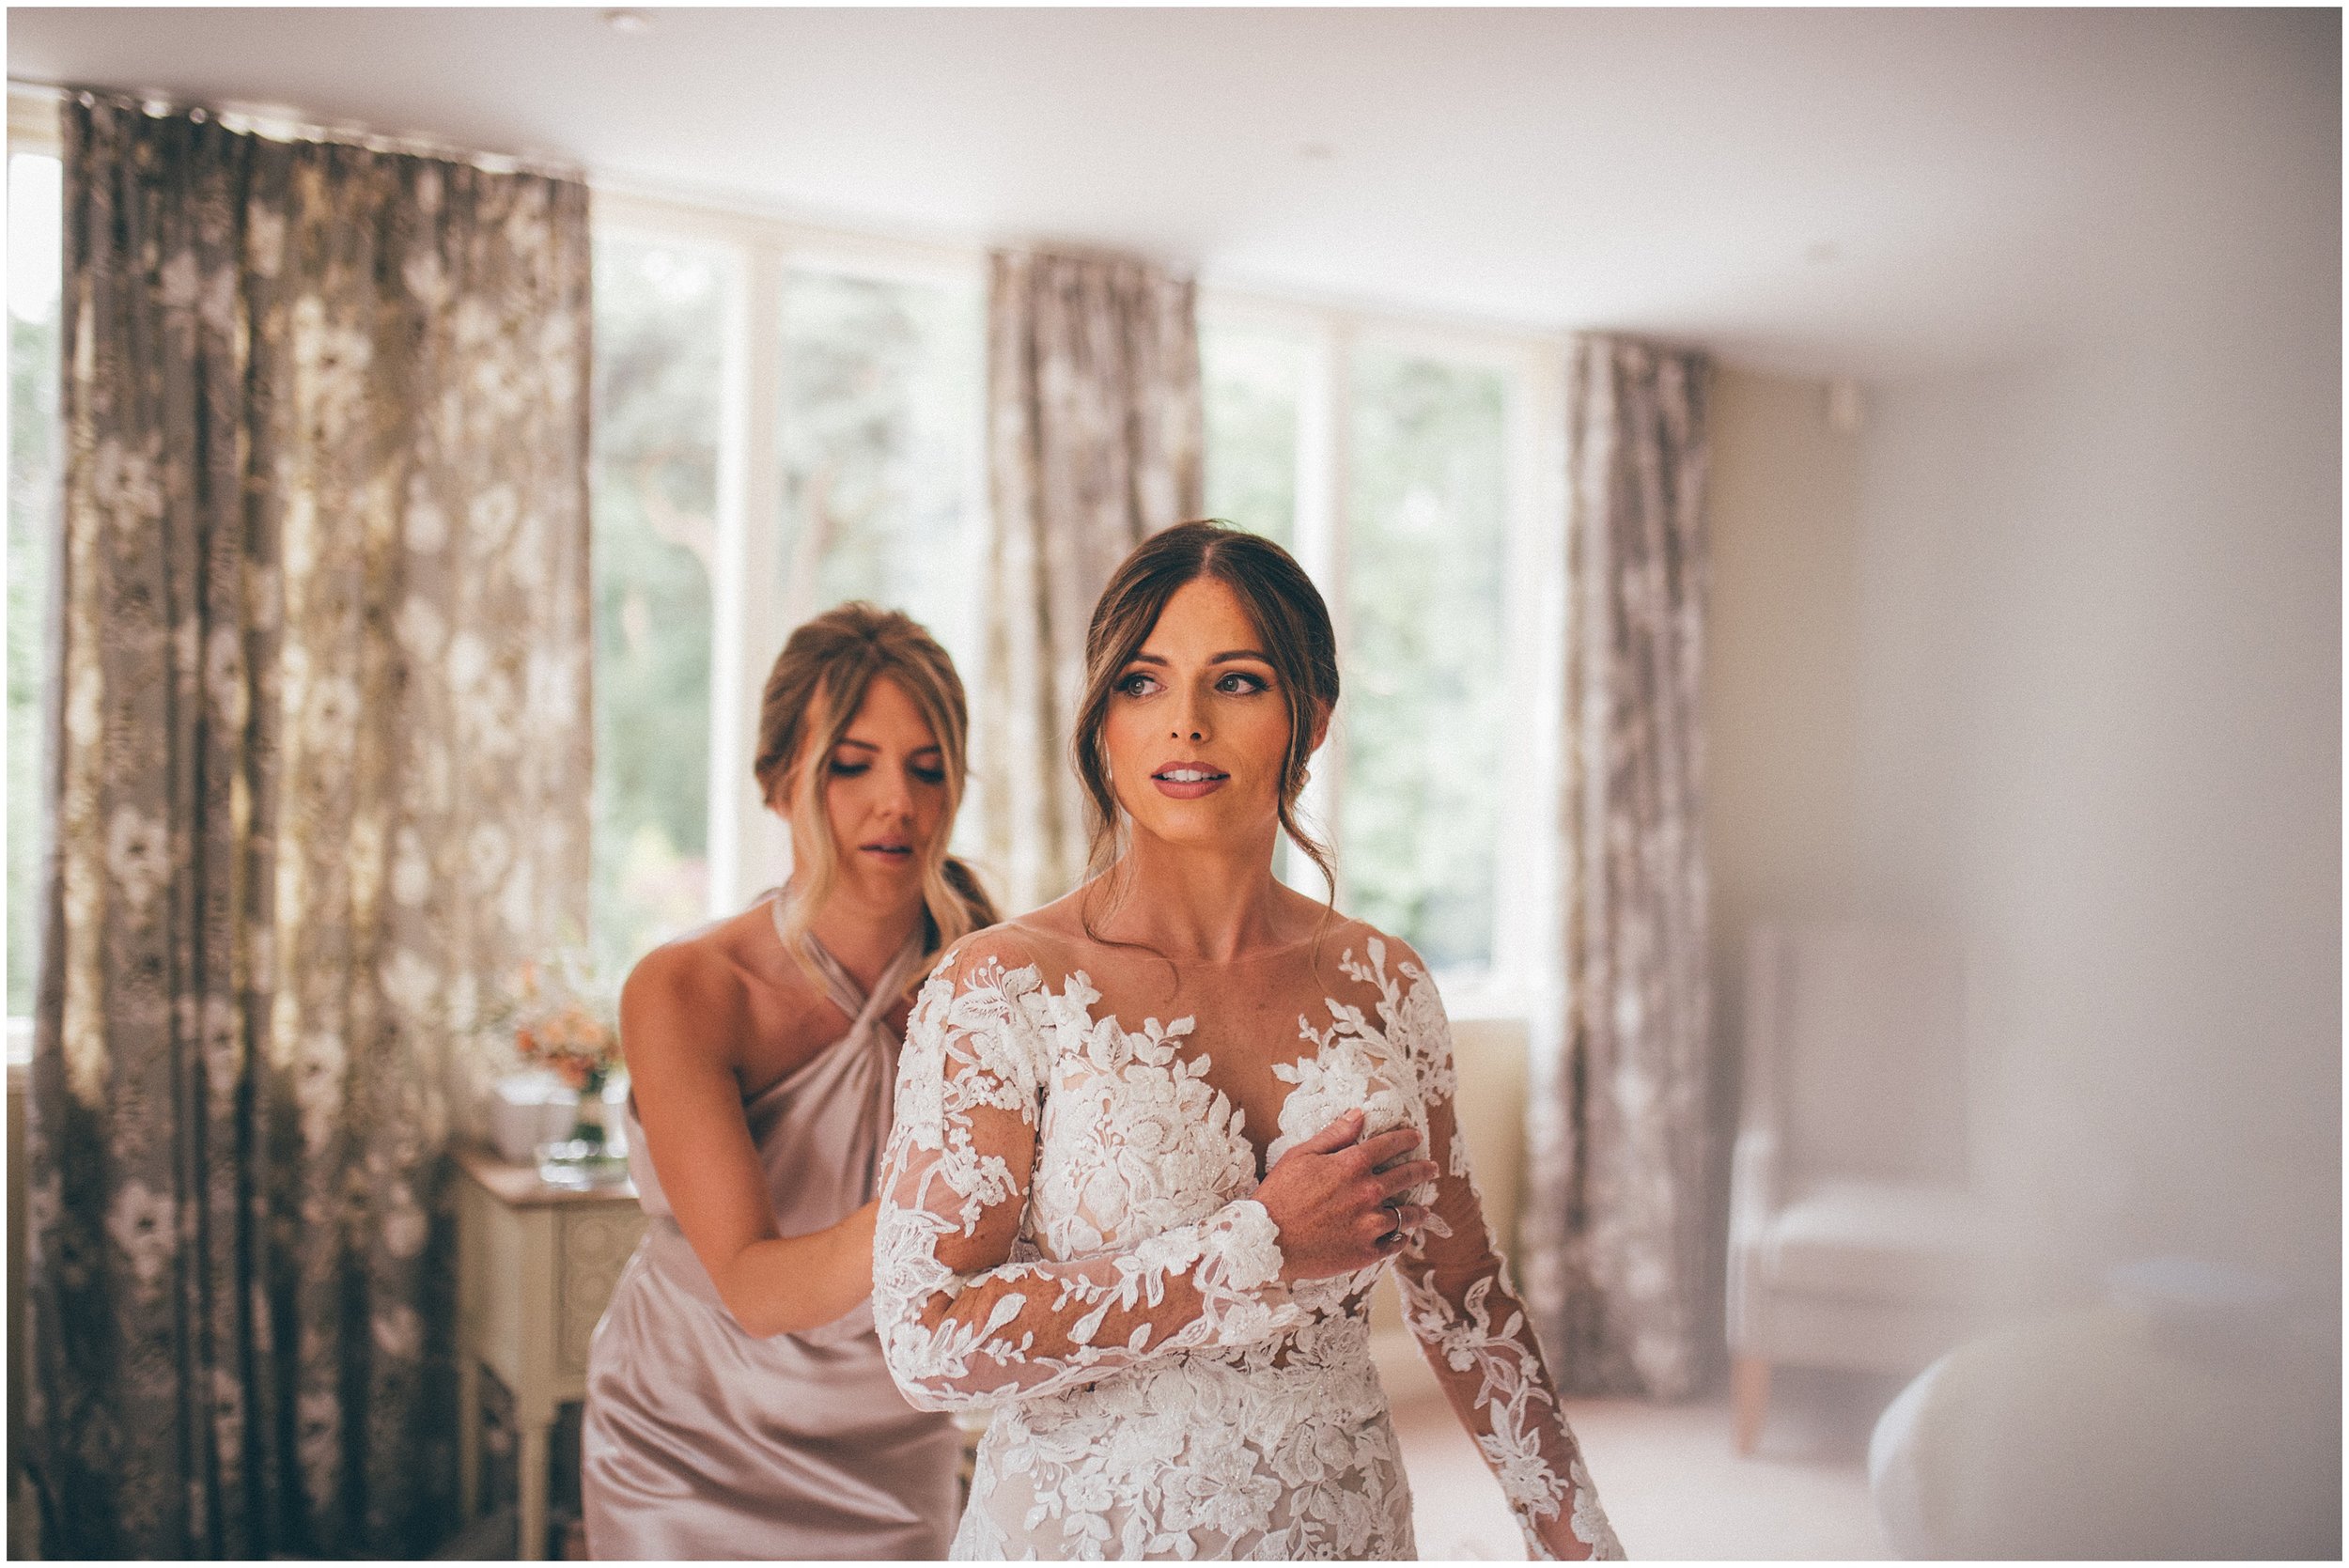 Bride gets ready for her wedding at Abbeywood Estate in Delamere, Cheshire